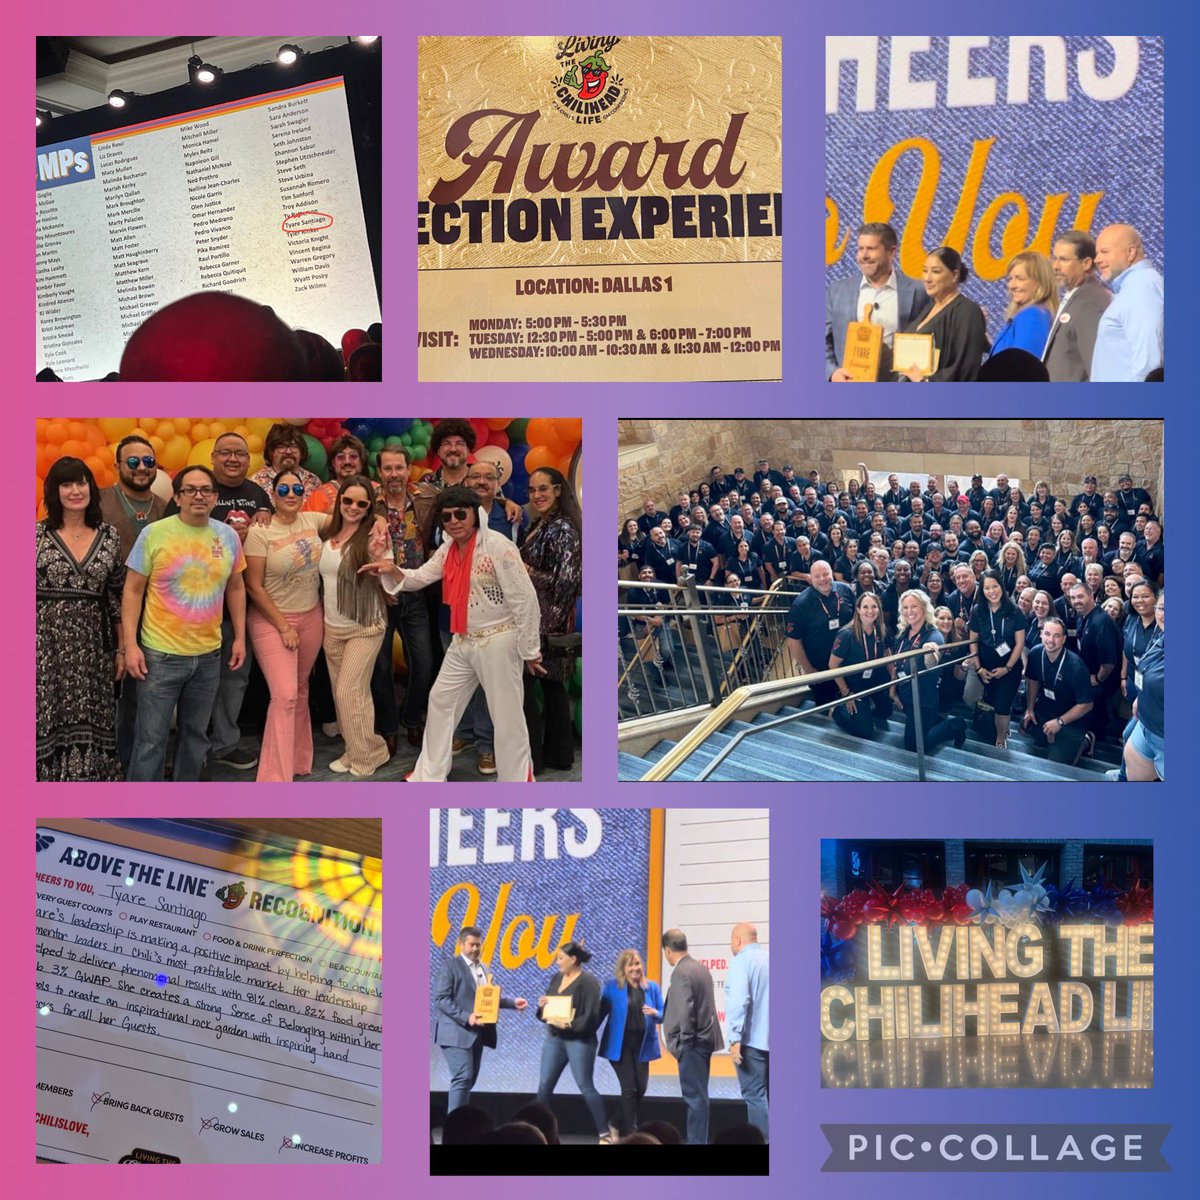 Congratulations to my amazing team at North McAllen @Karenilse9 @justinngage @AstridTrevino22 your exceptional leadership, dedication, and hard work was seen on the big stage today! Cheers to you for leading the region in KPIs this past year! WE did it❤️ #Chiliheadlife